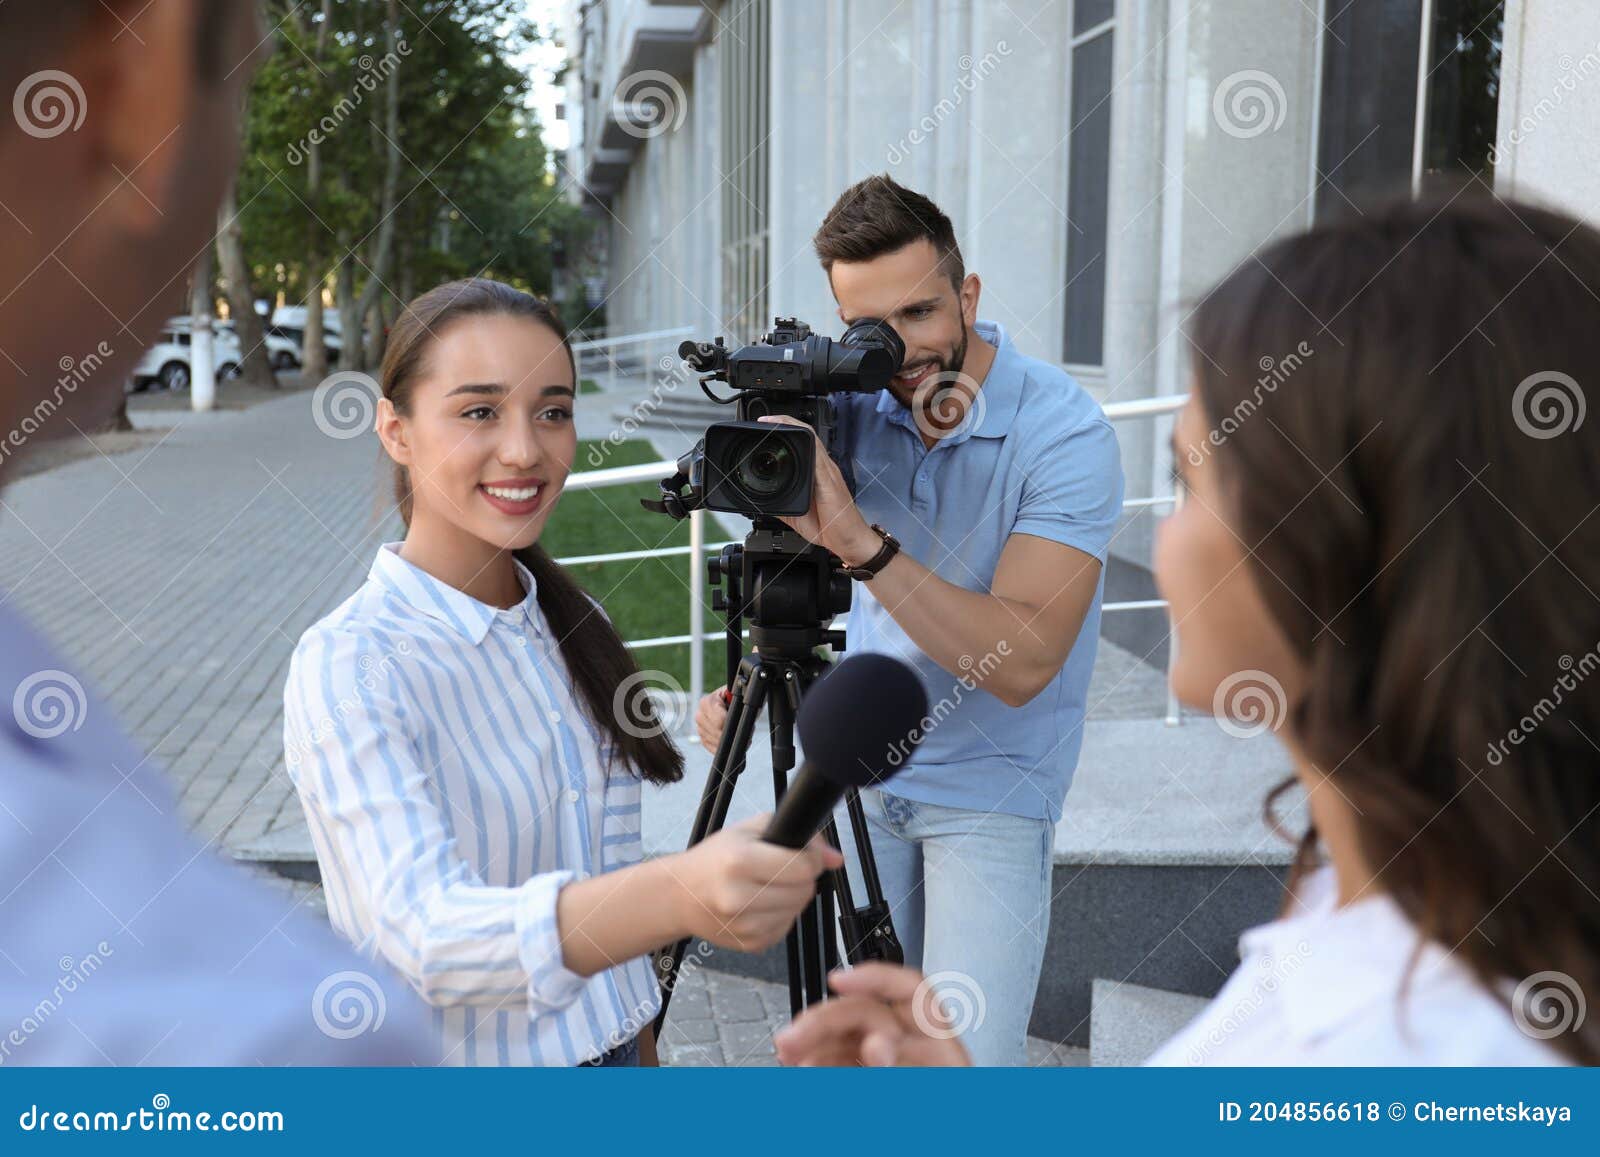 professional journalist and operator with video camera taking interview outdoors